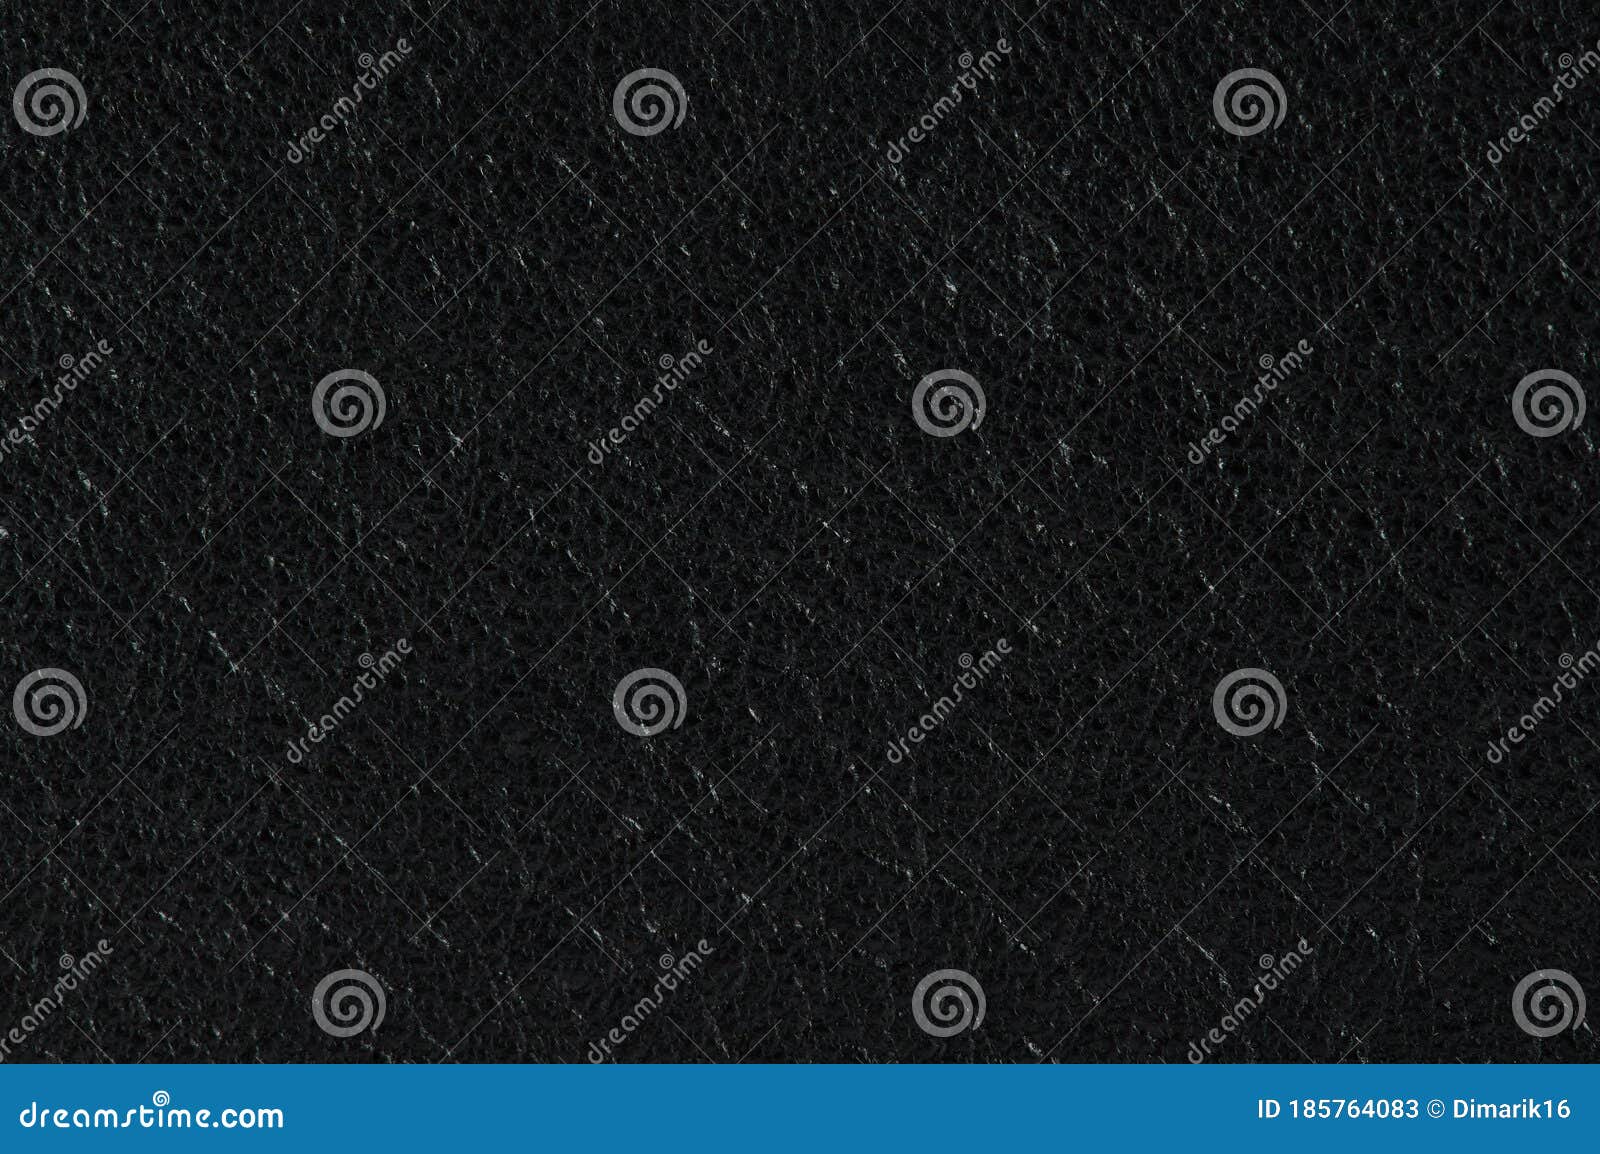 Rough Black Color Leather Texture Stock Image - Image of leather ...